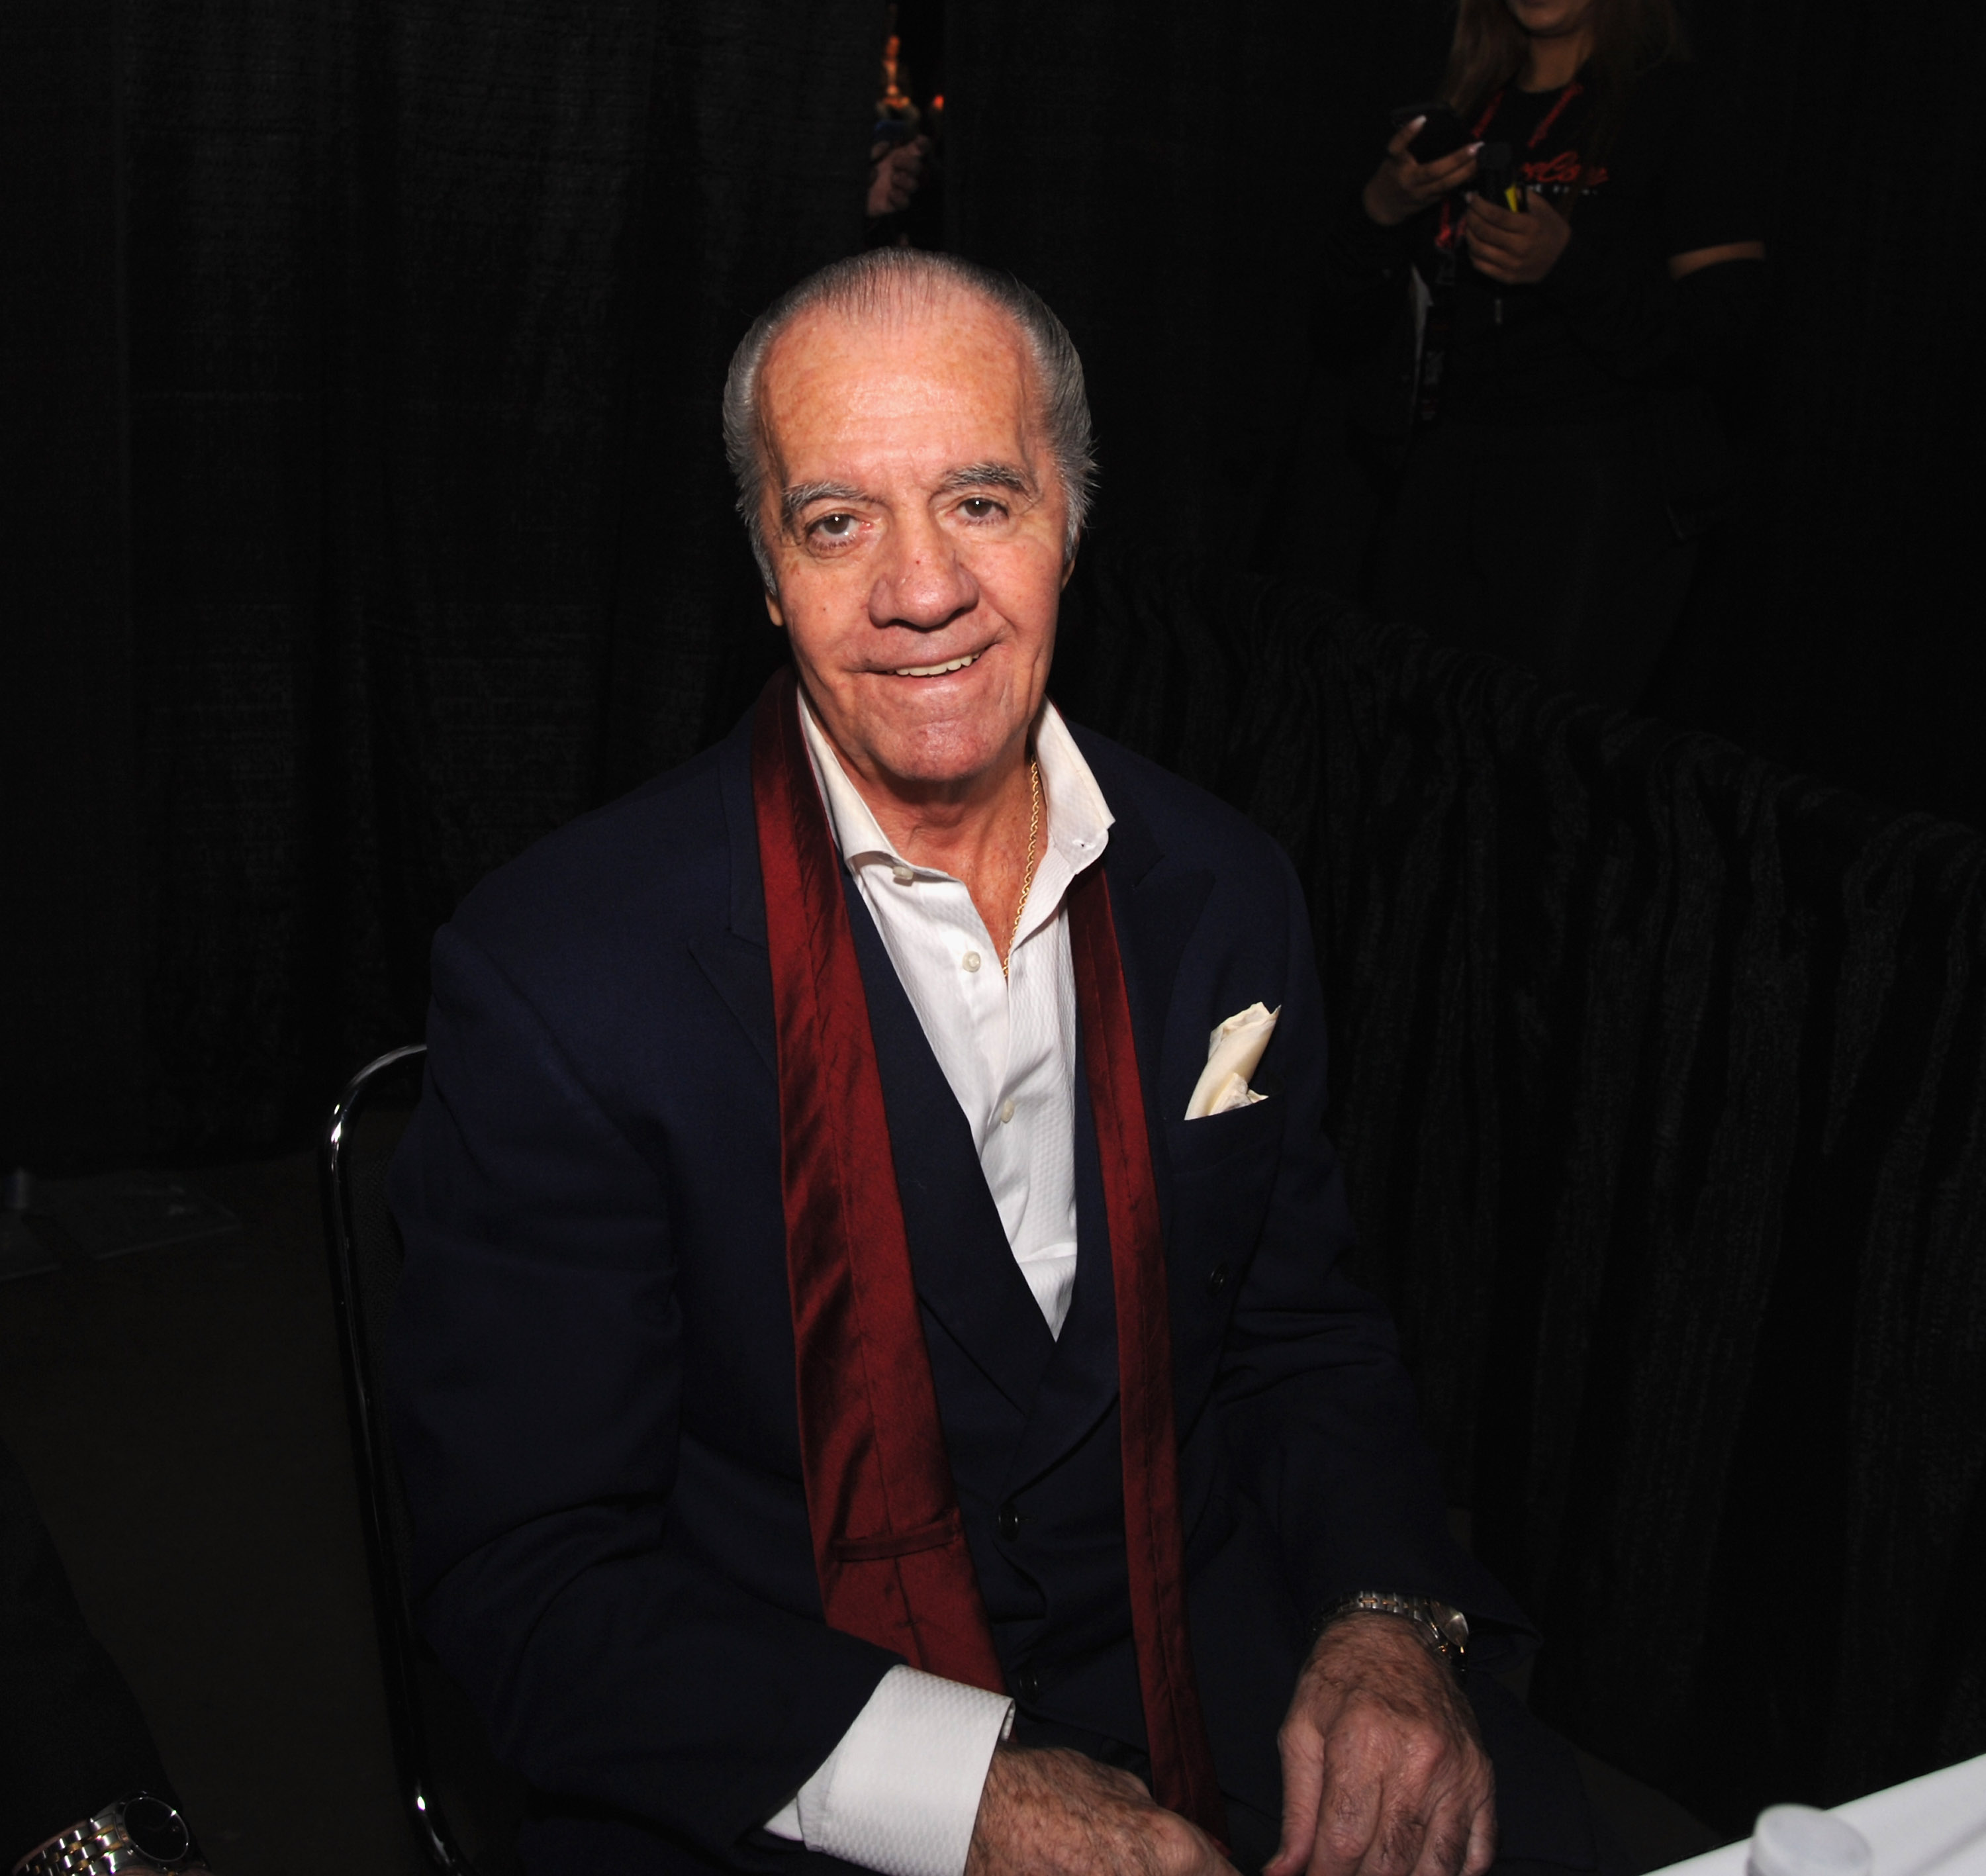 Tony Sirico attends SopranosCon 2019 at Meadowlands Exposition Center on November 23, 2019, in Secaucus, New Jersey. | Source: Getty Images